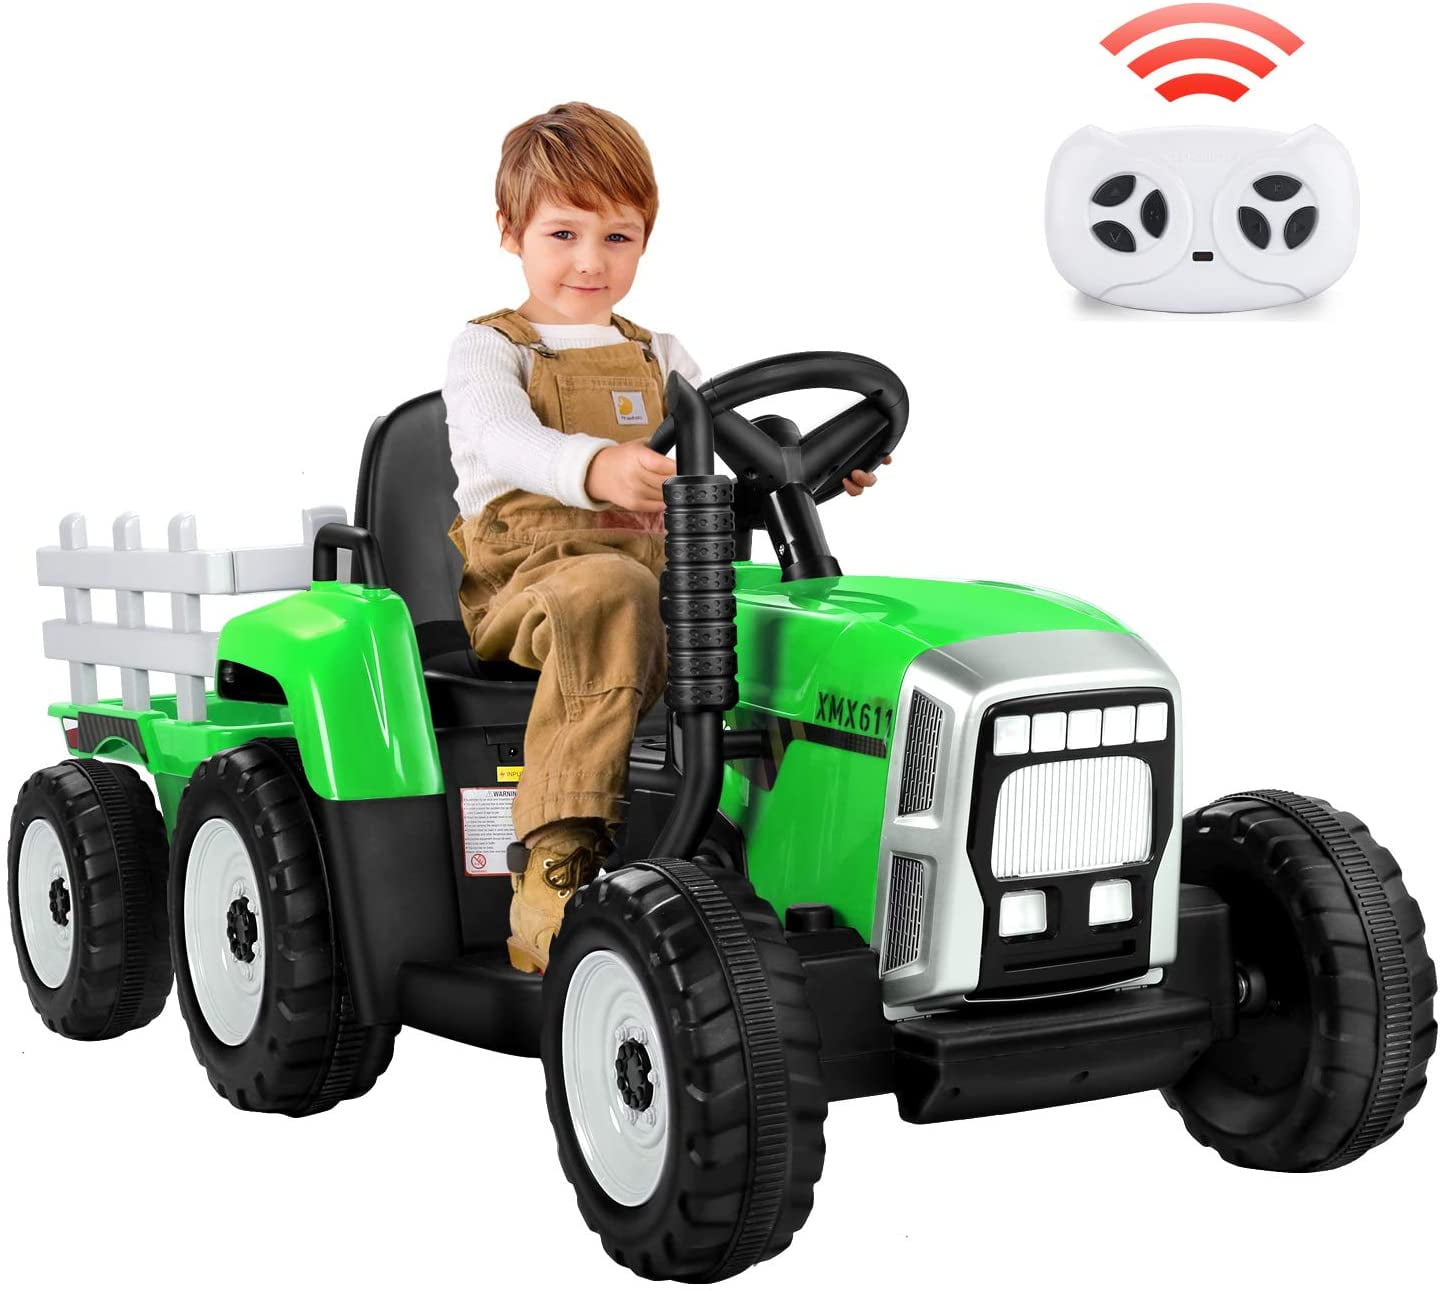 12V Electric Kids Tractor Ride On Toy Children’s Vehicle with Trailer 2 In 1 